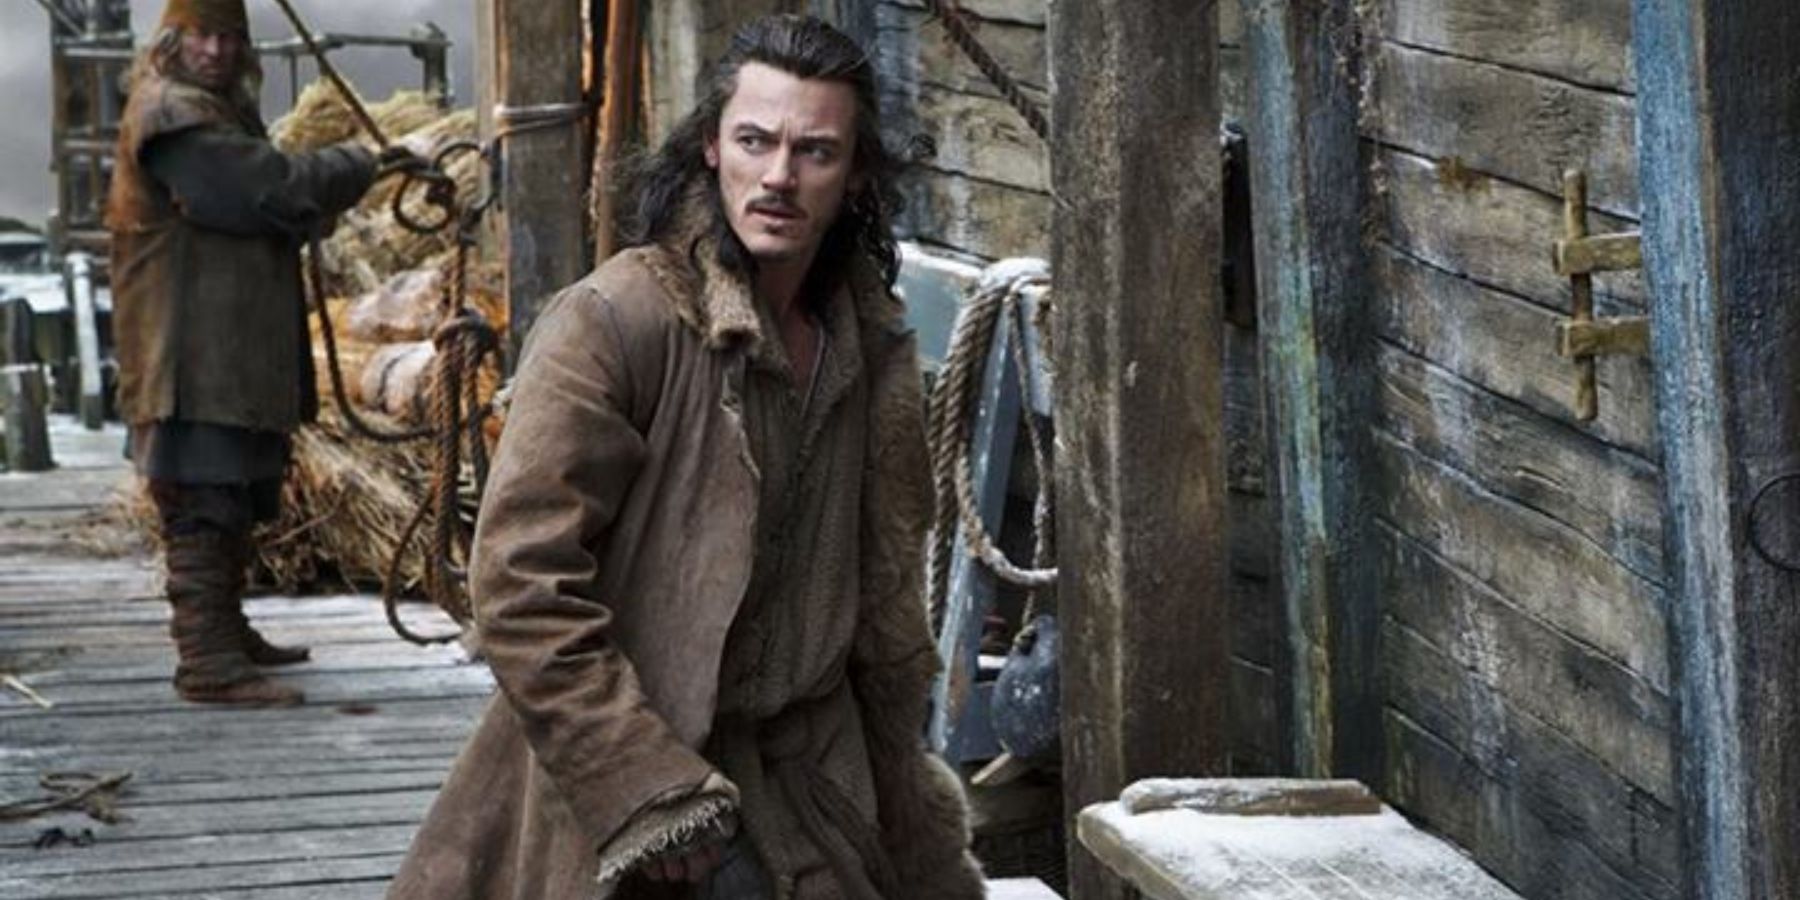 Bard the Bowman, his daughters and their outfits